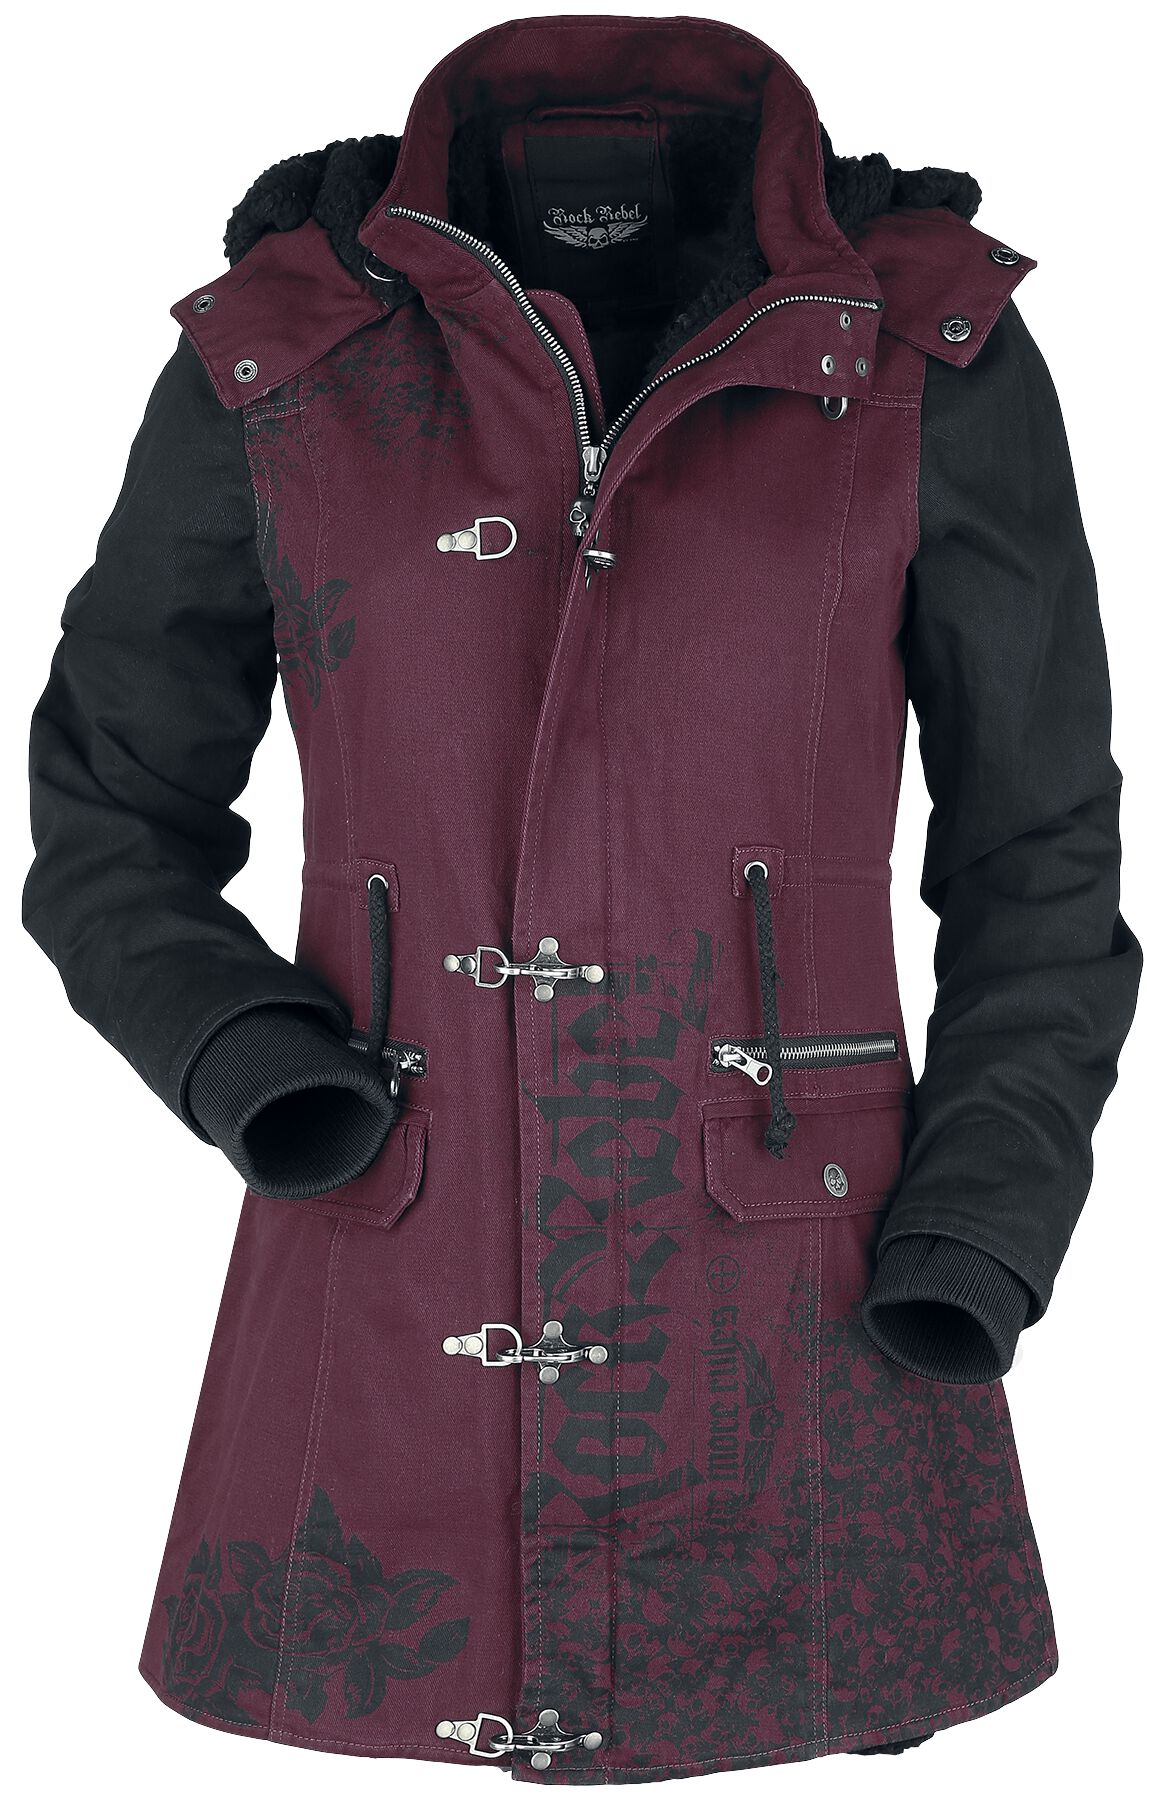 Image of Giacca invernale di Rock Rebel by EMP - Winter jacket with Rock Rebel prints - XS a XXL - Donna - rosso/nero